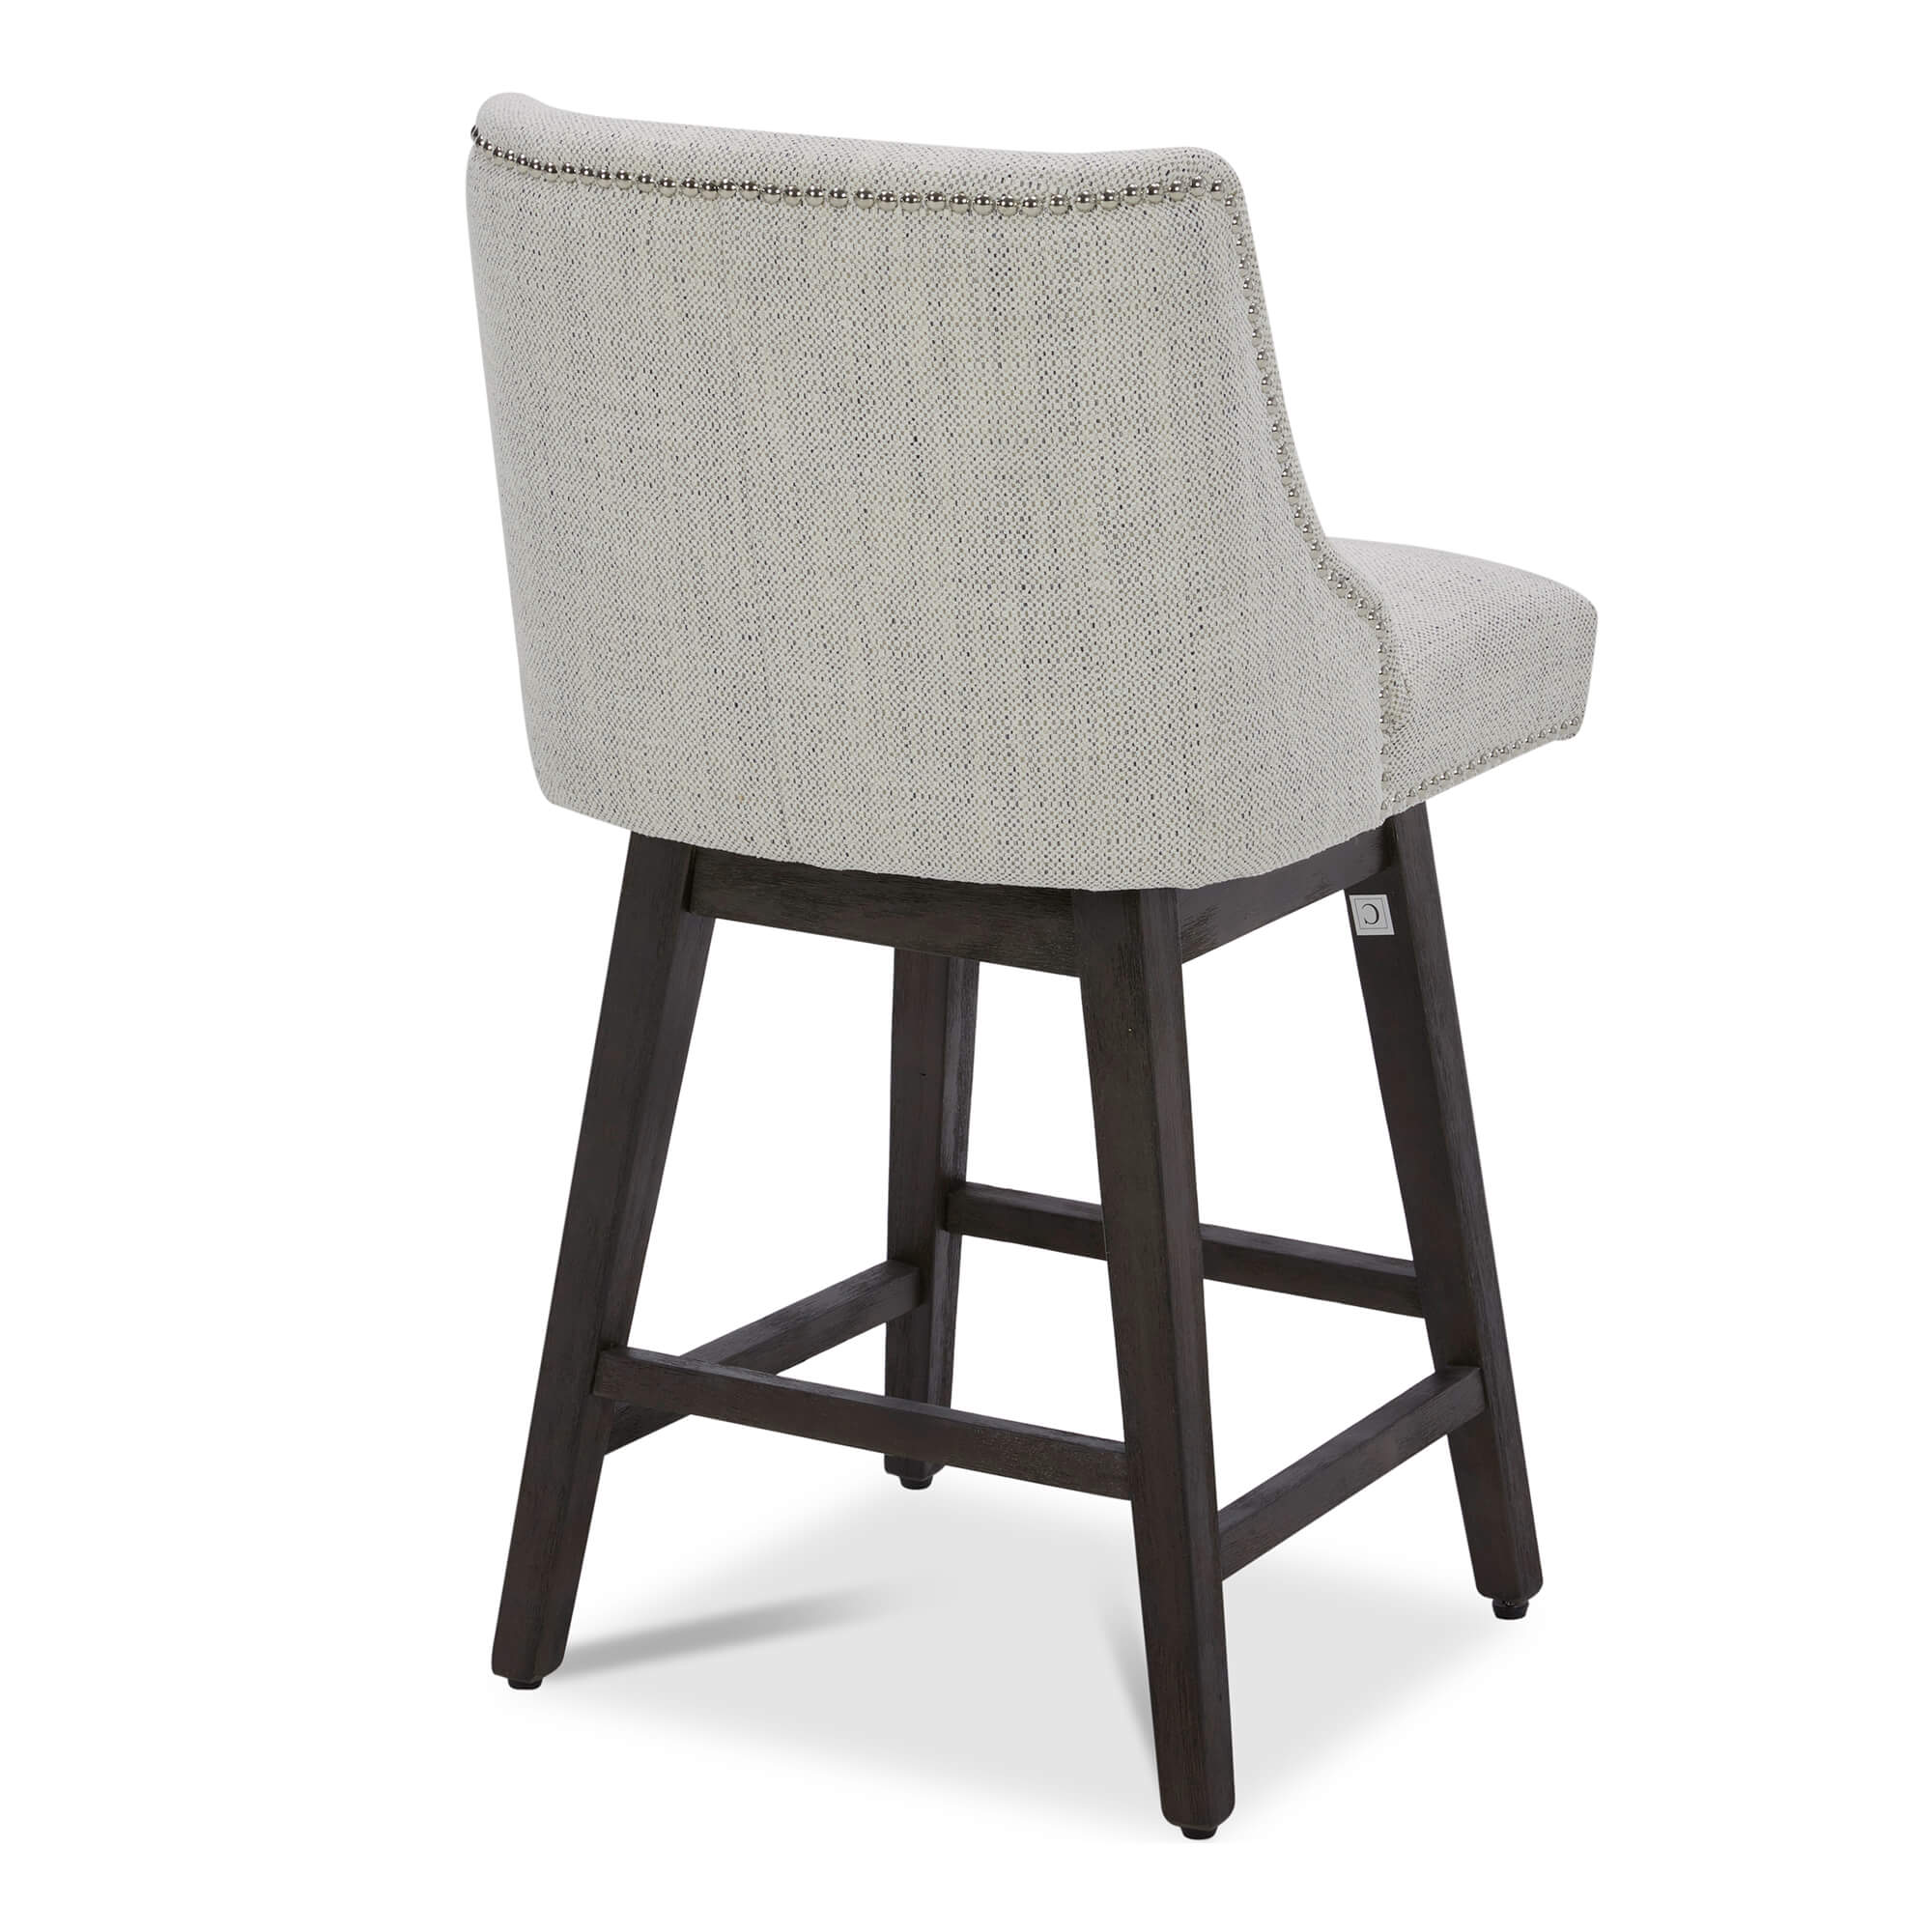 CHITA LIVING-Asher Swivel Counter Stool with Nailhead Trim( Set of 2)-Counter Stools-Fabric-Ivory-